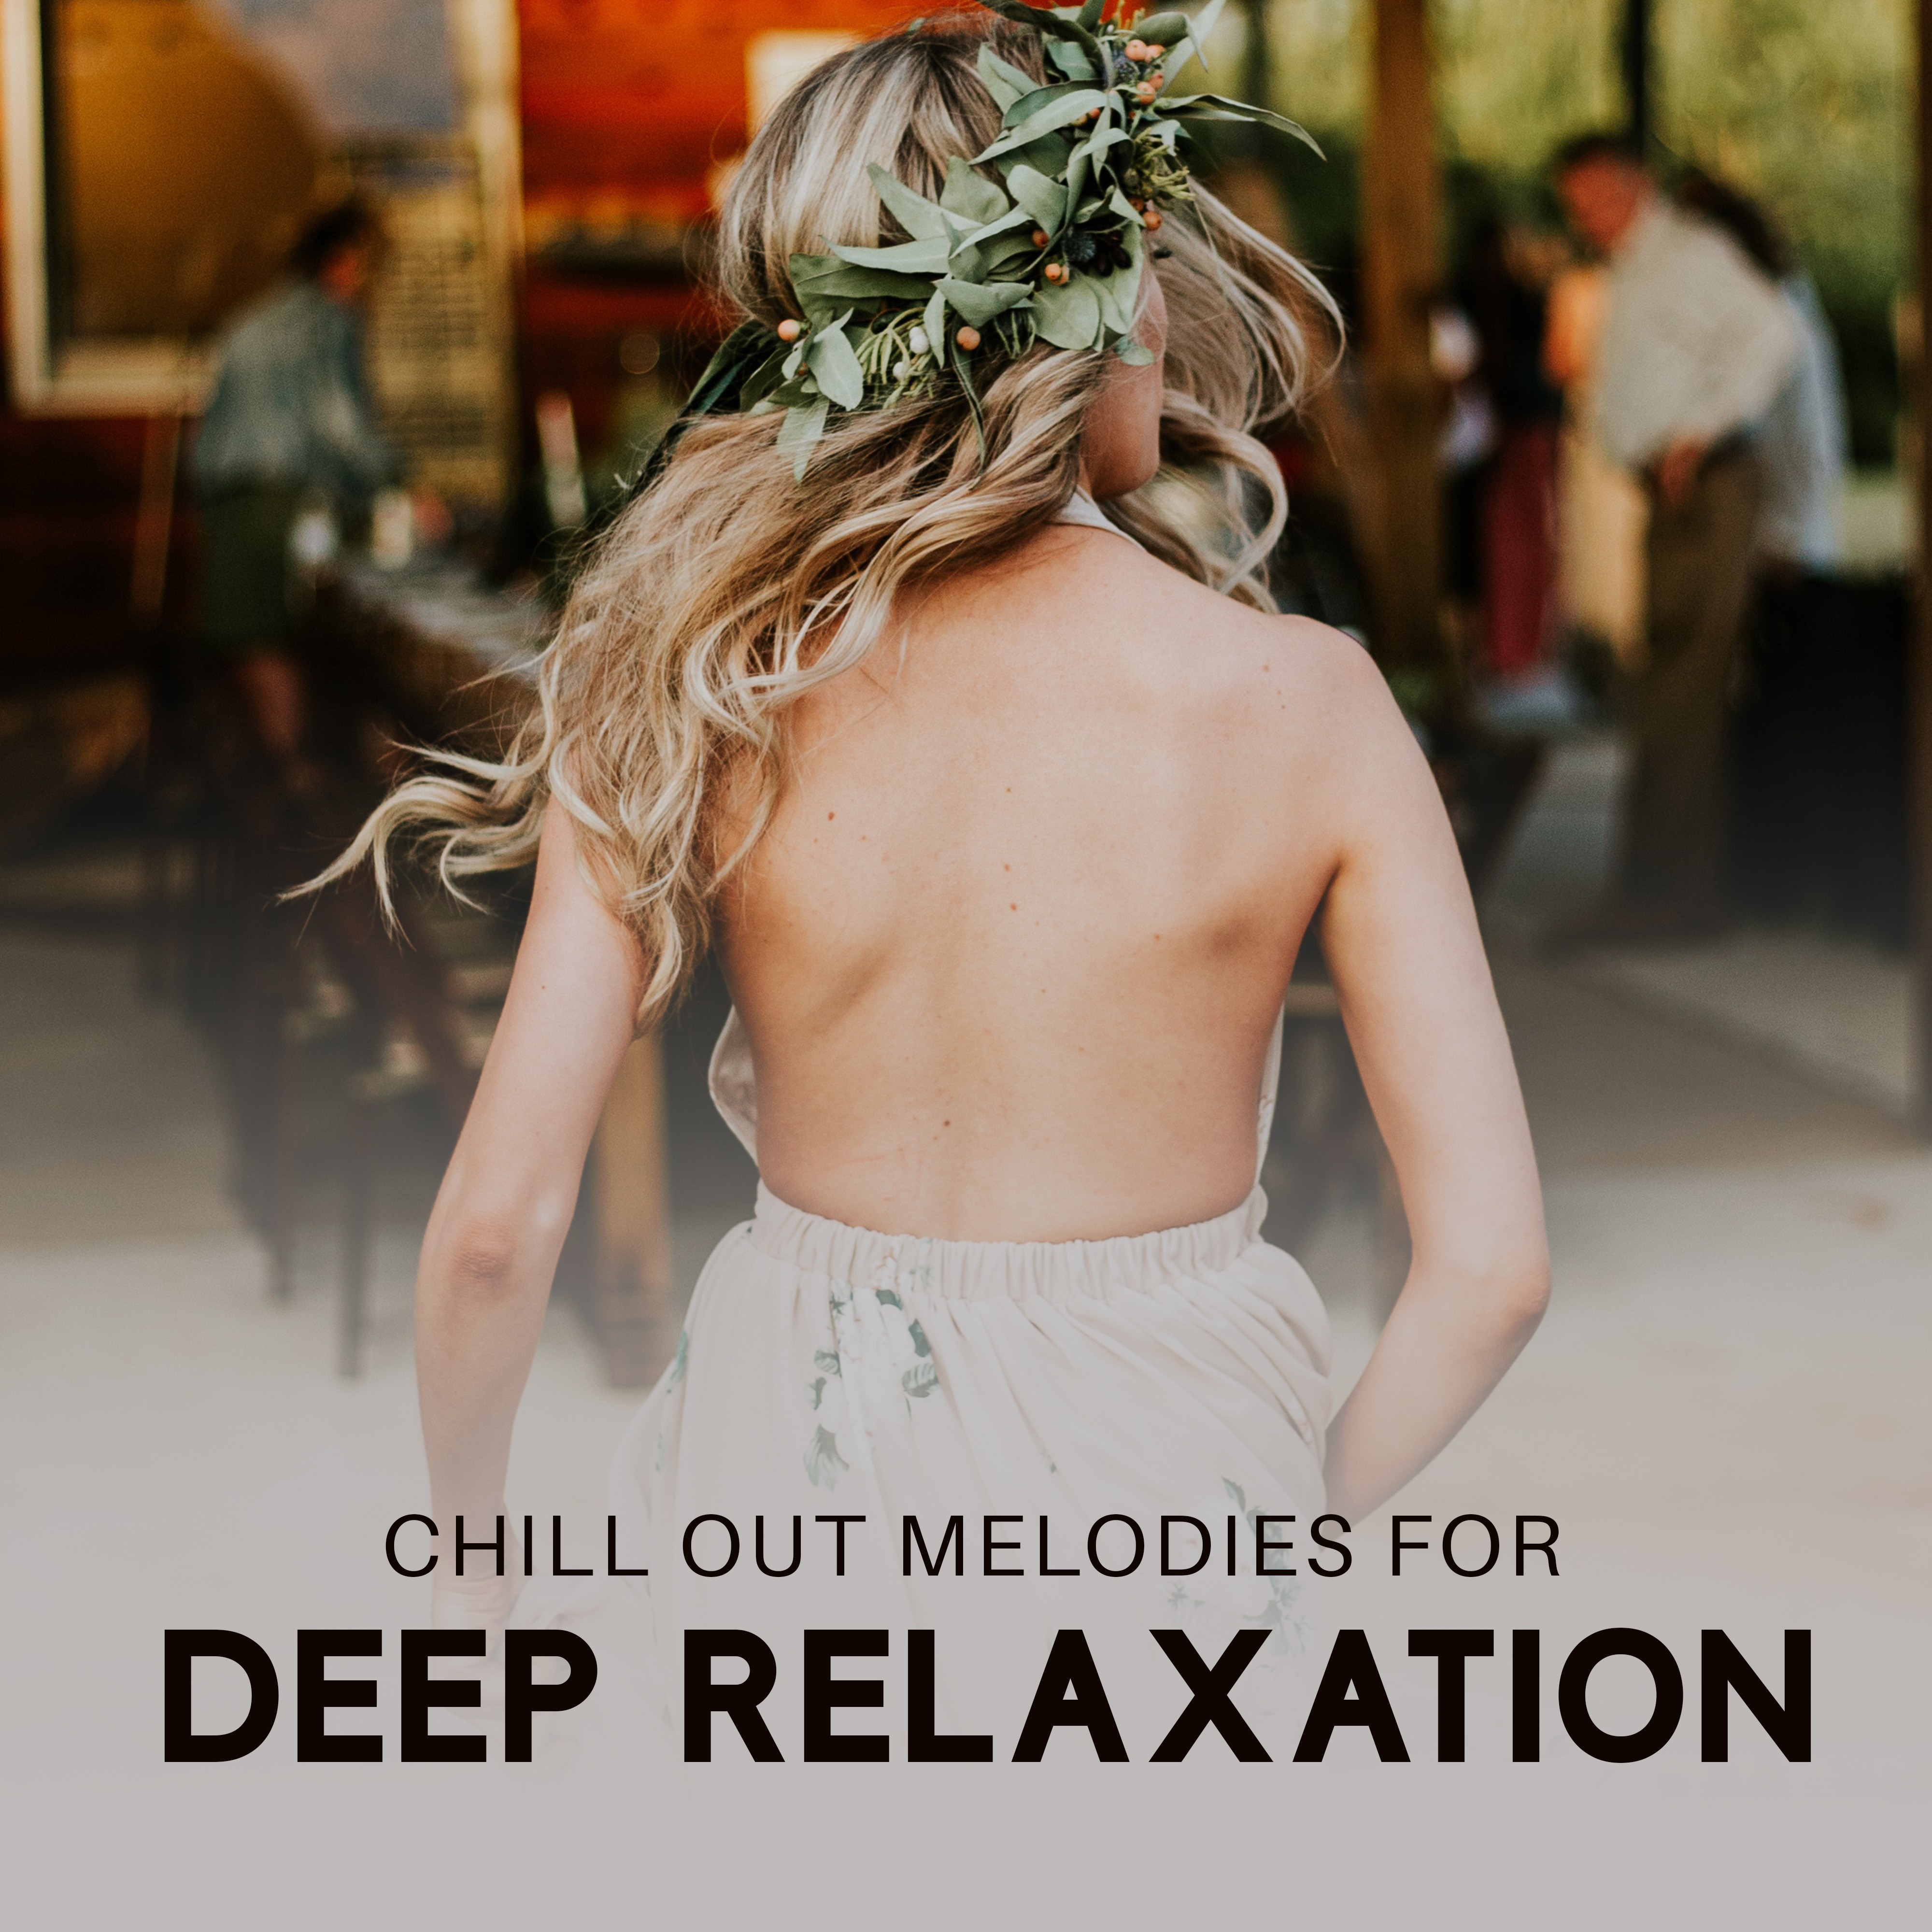 Chill Out Melodies for Deep Relaxation